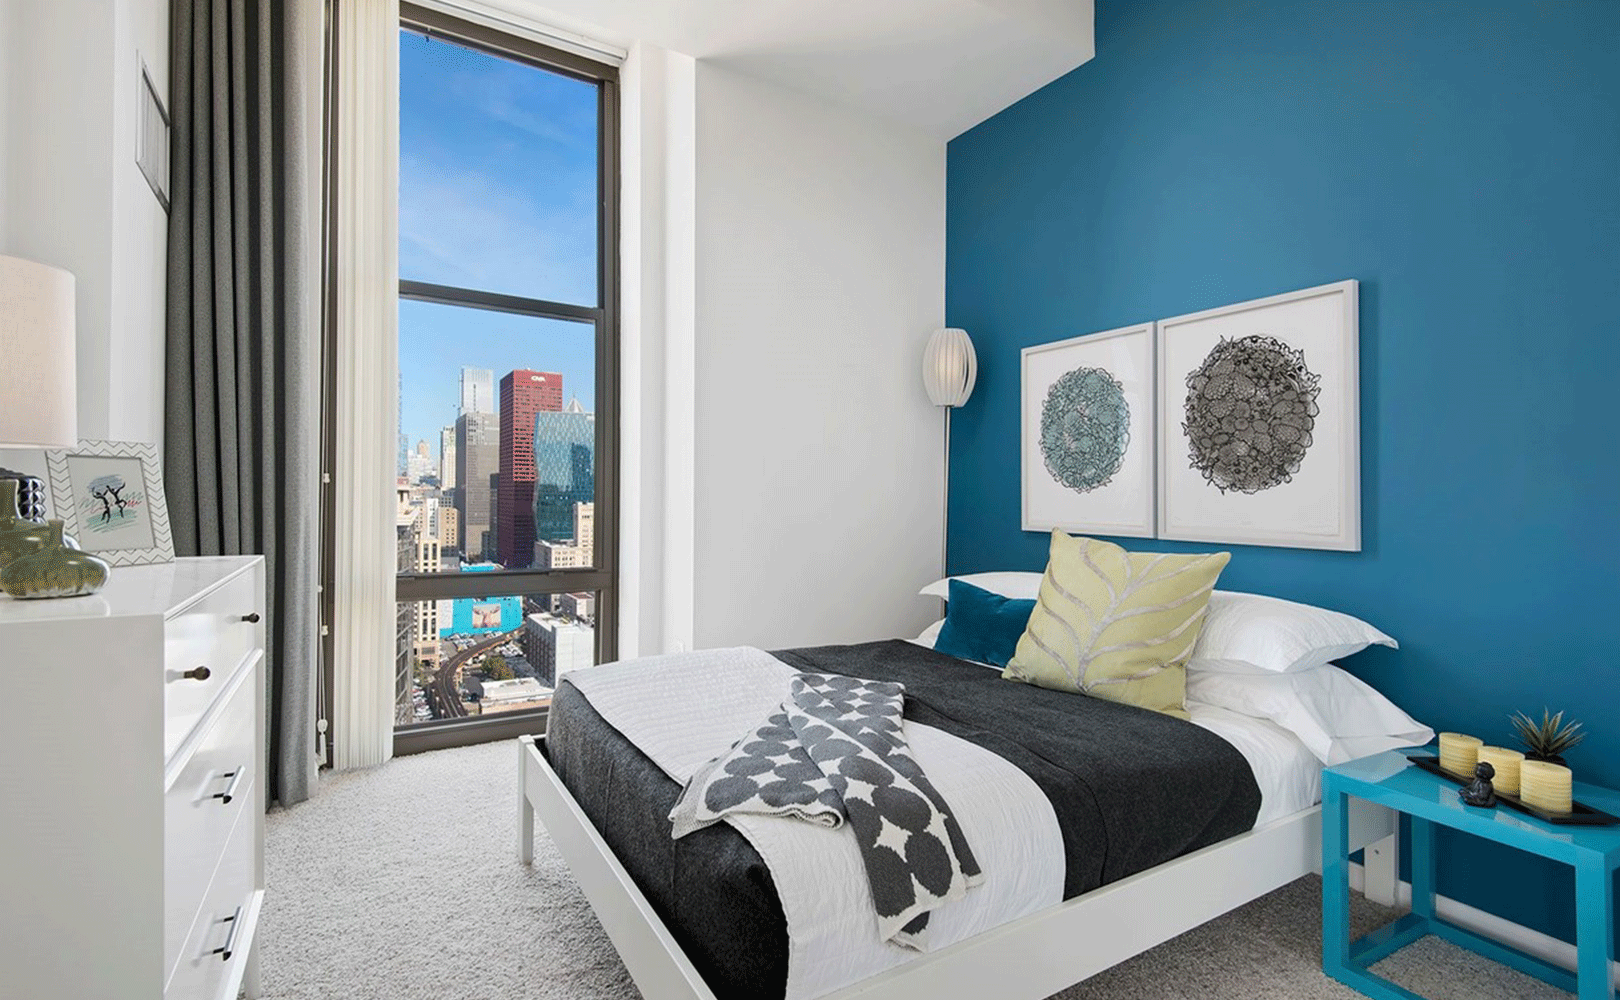 South loop apartment building bedroom overlooking down town streets of Chicago